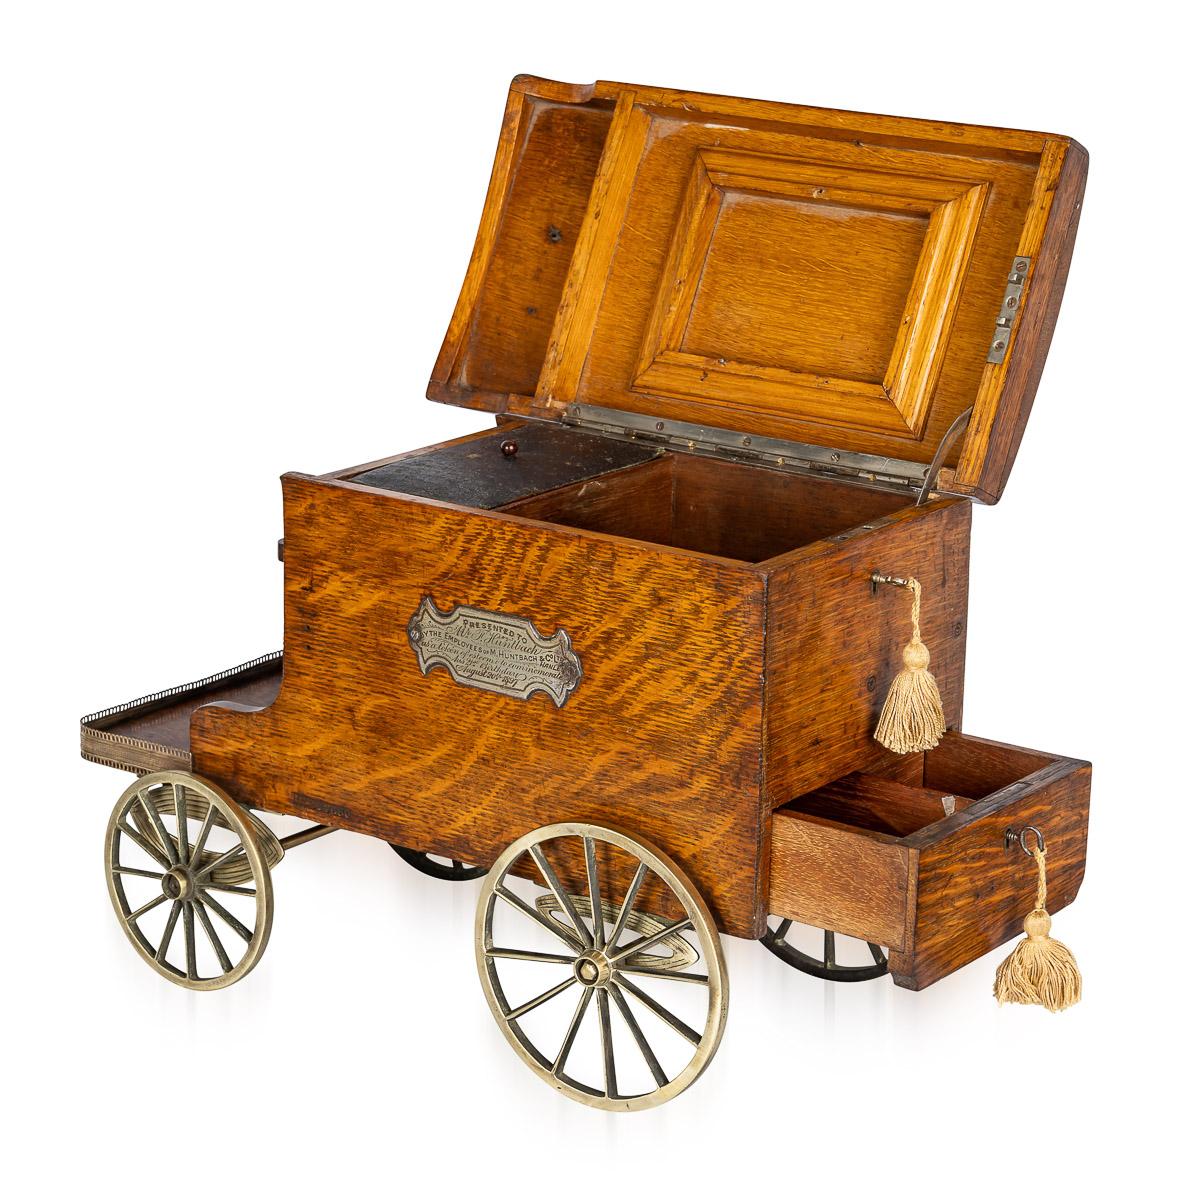 Late 19th Century Antique 19th Century Victorian Novelty Smokers Compendium Carriage c.1890